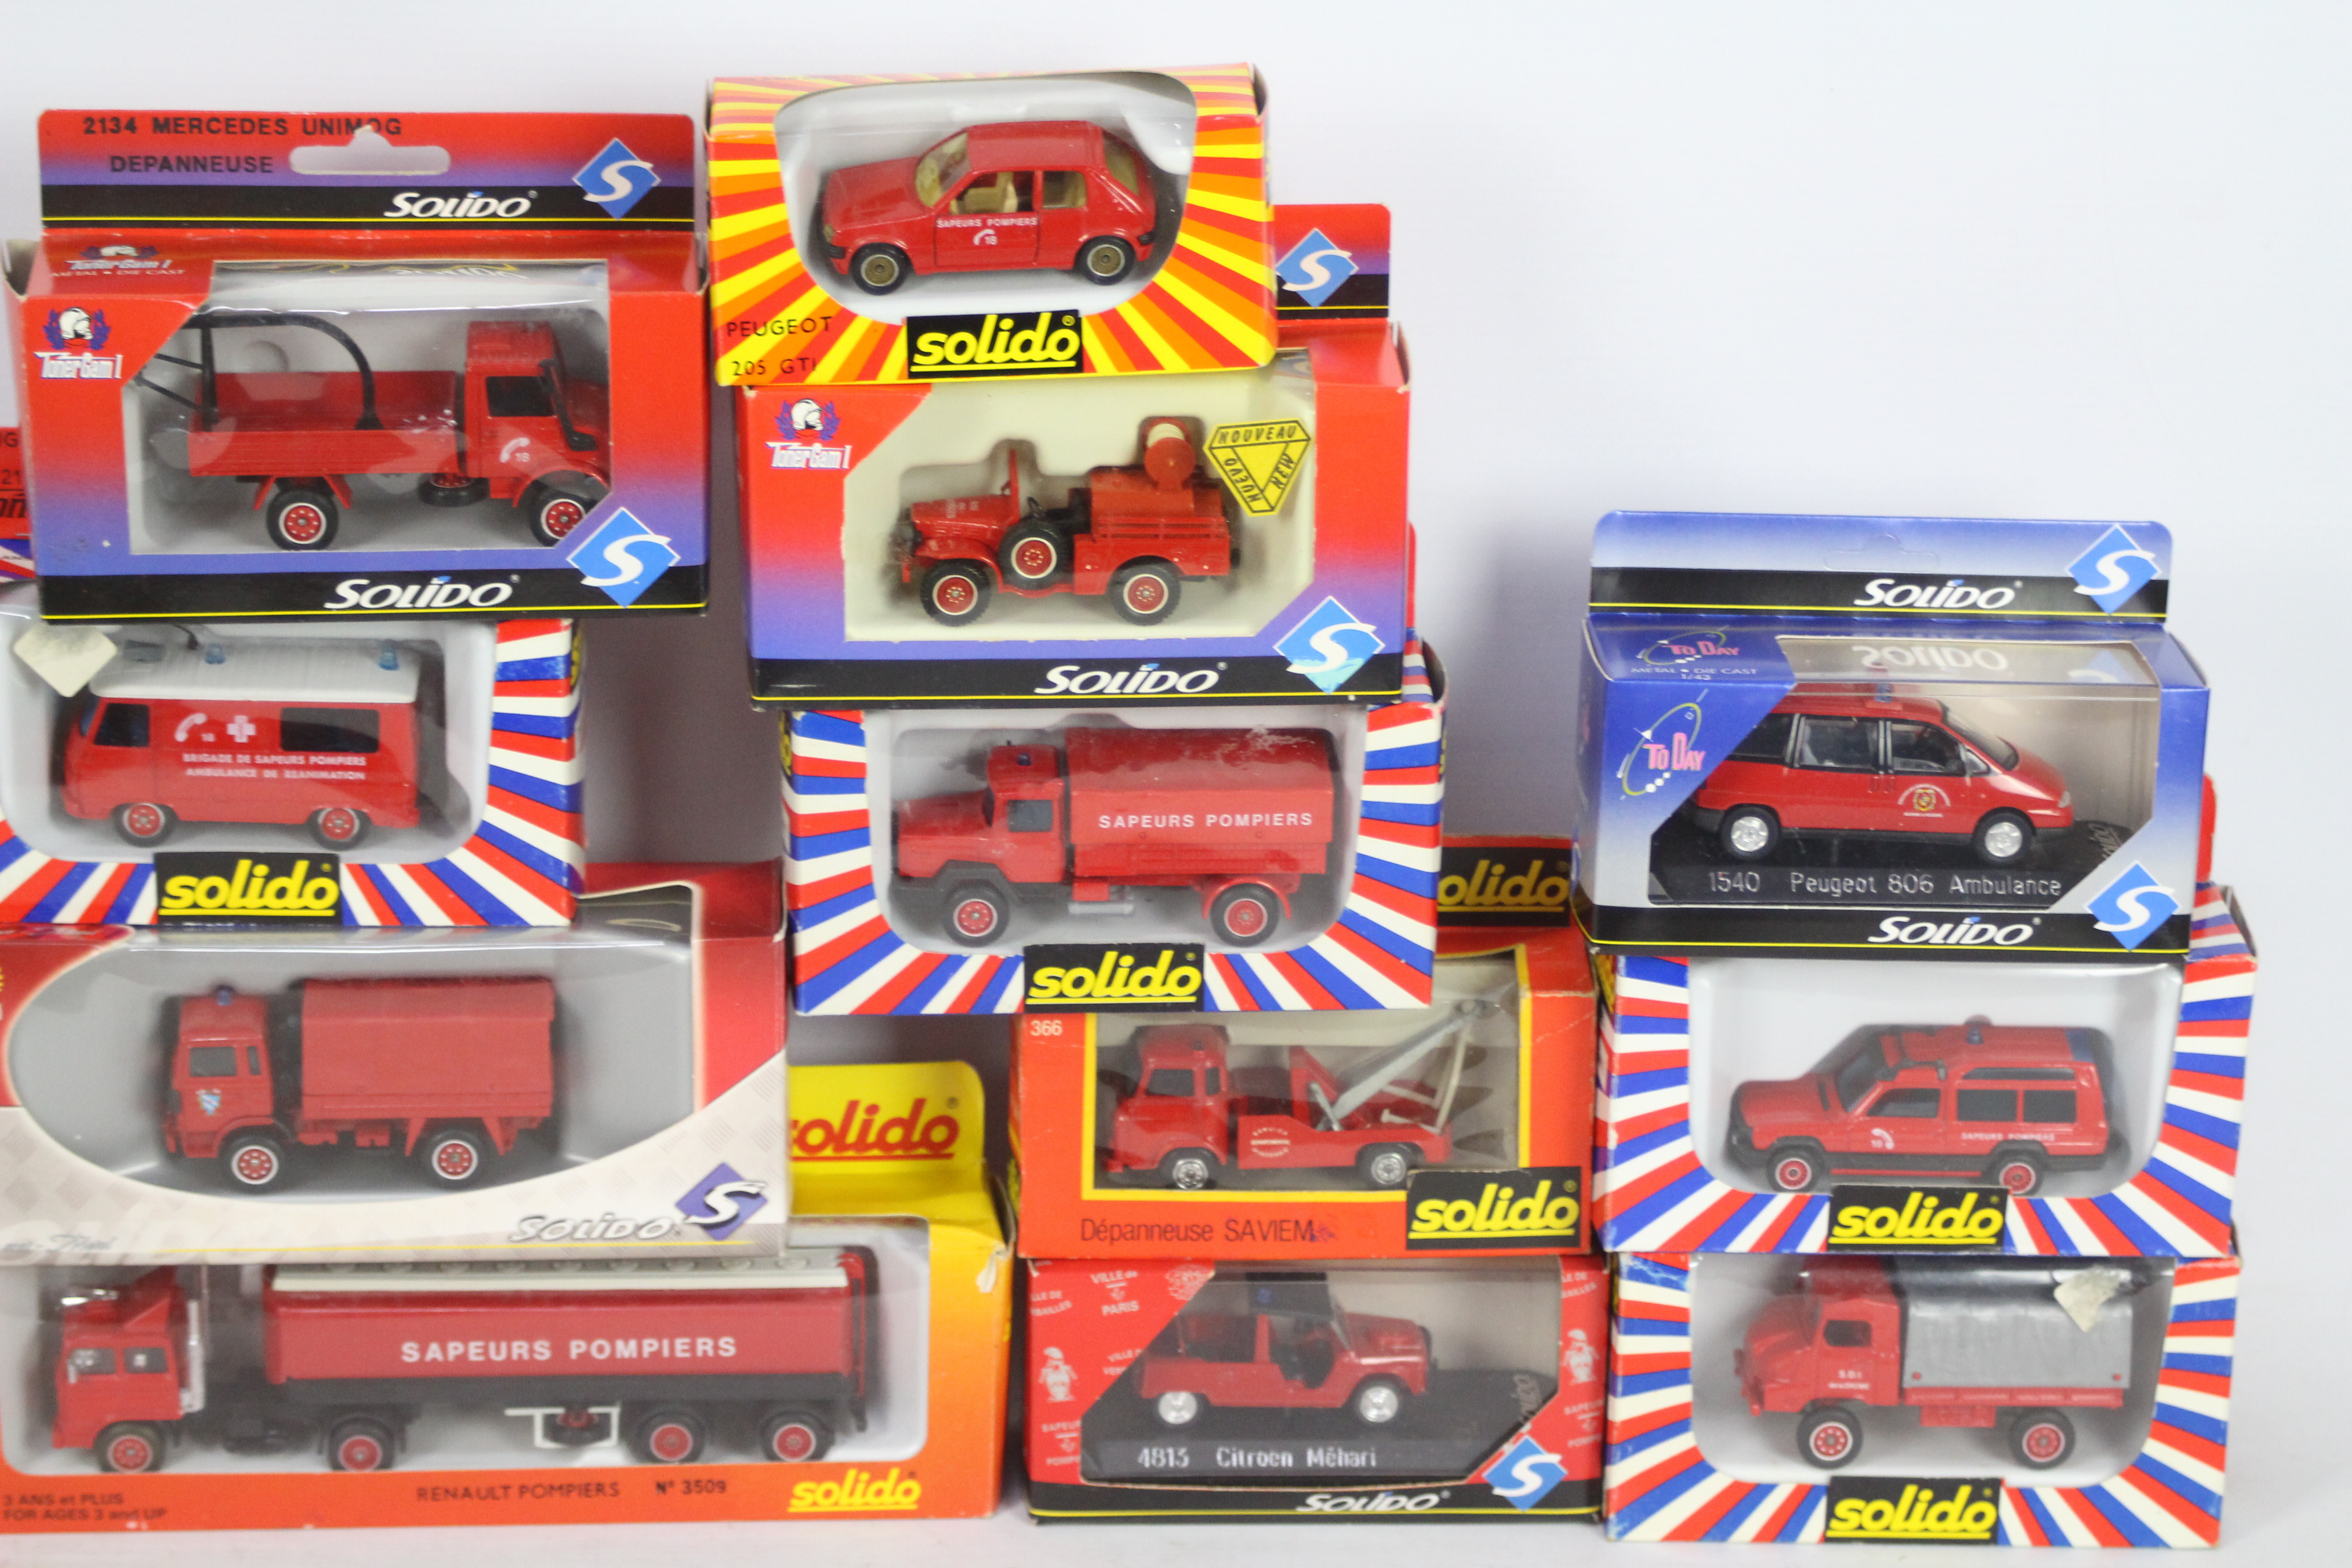 Solido - 15 boxed diecast model Fire Appliance / Vehicles from Solido. - Image 3 of 3